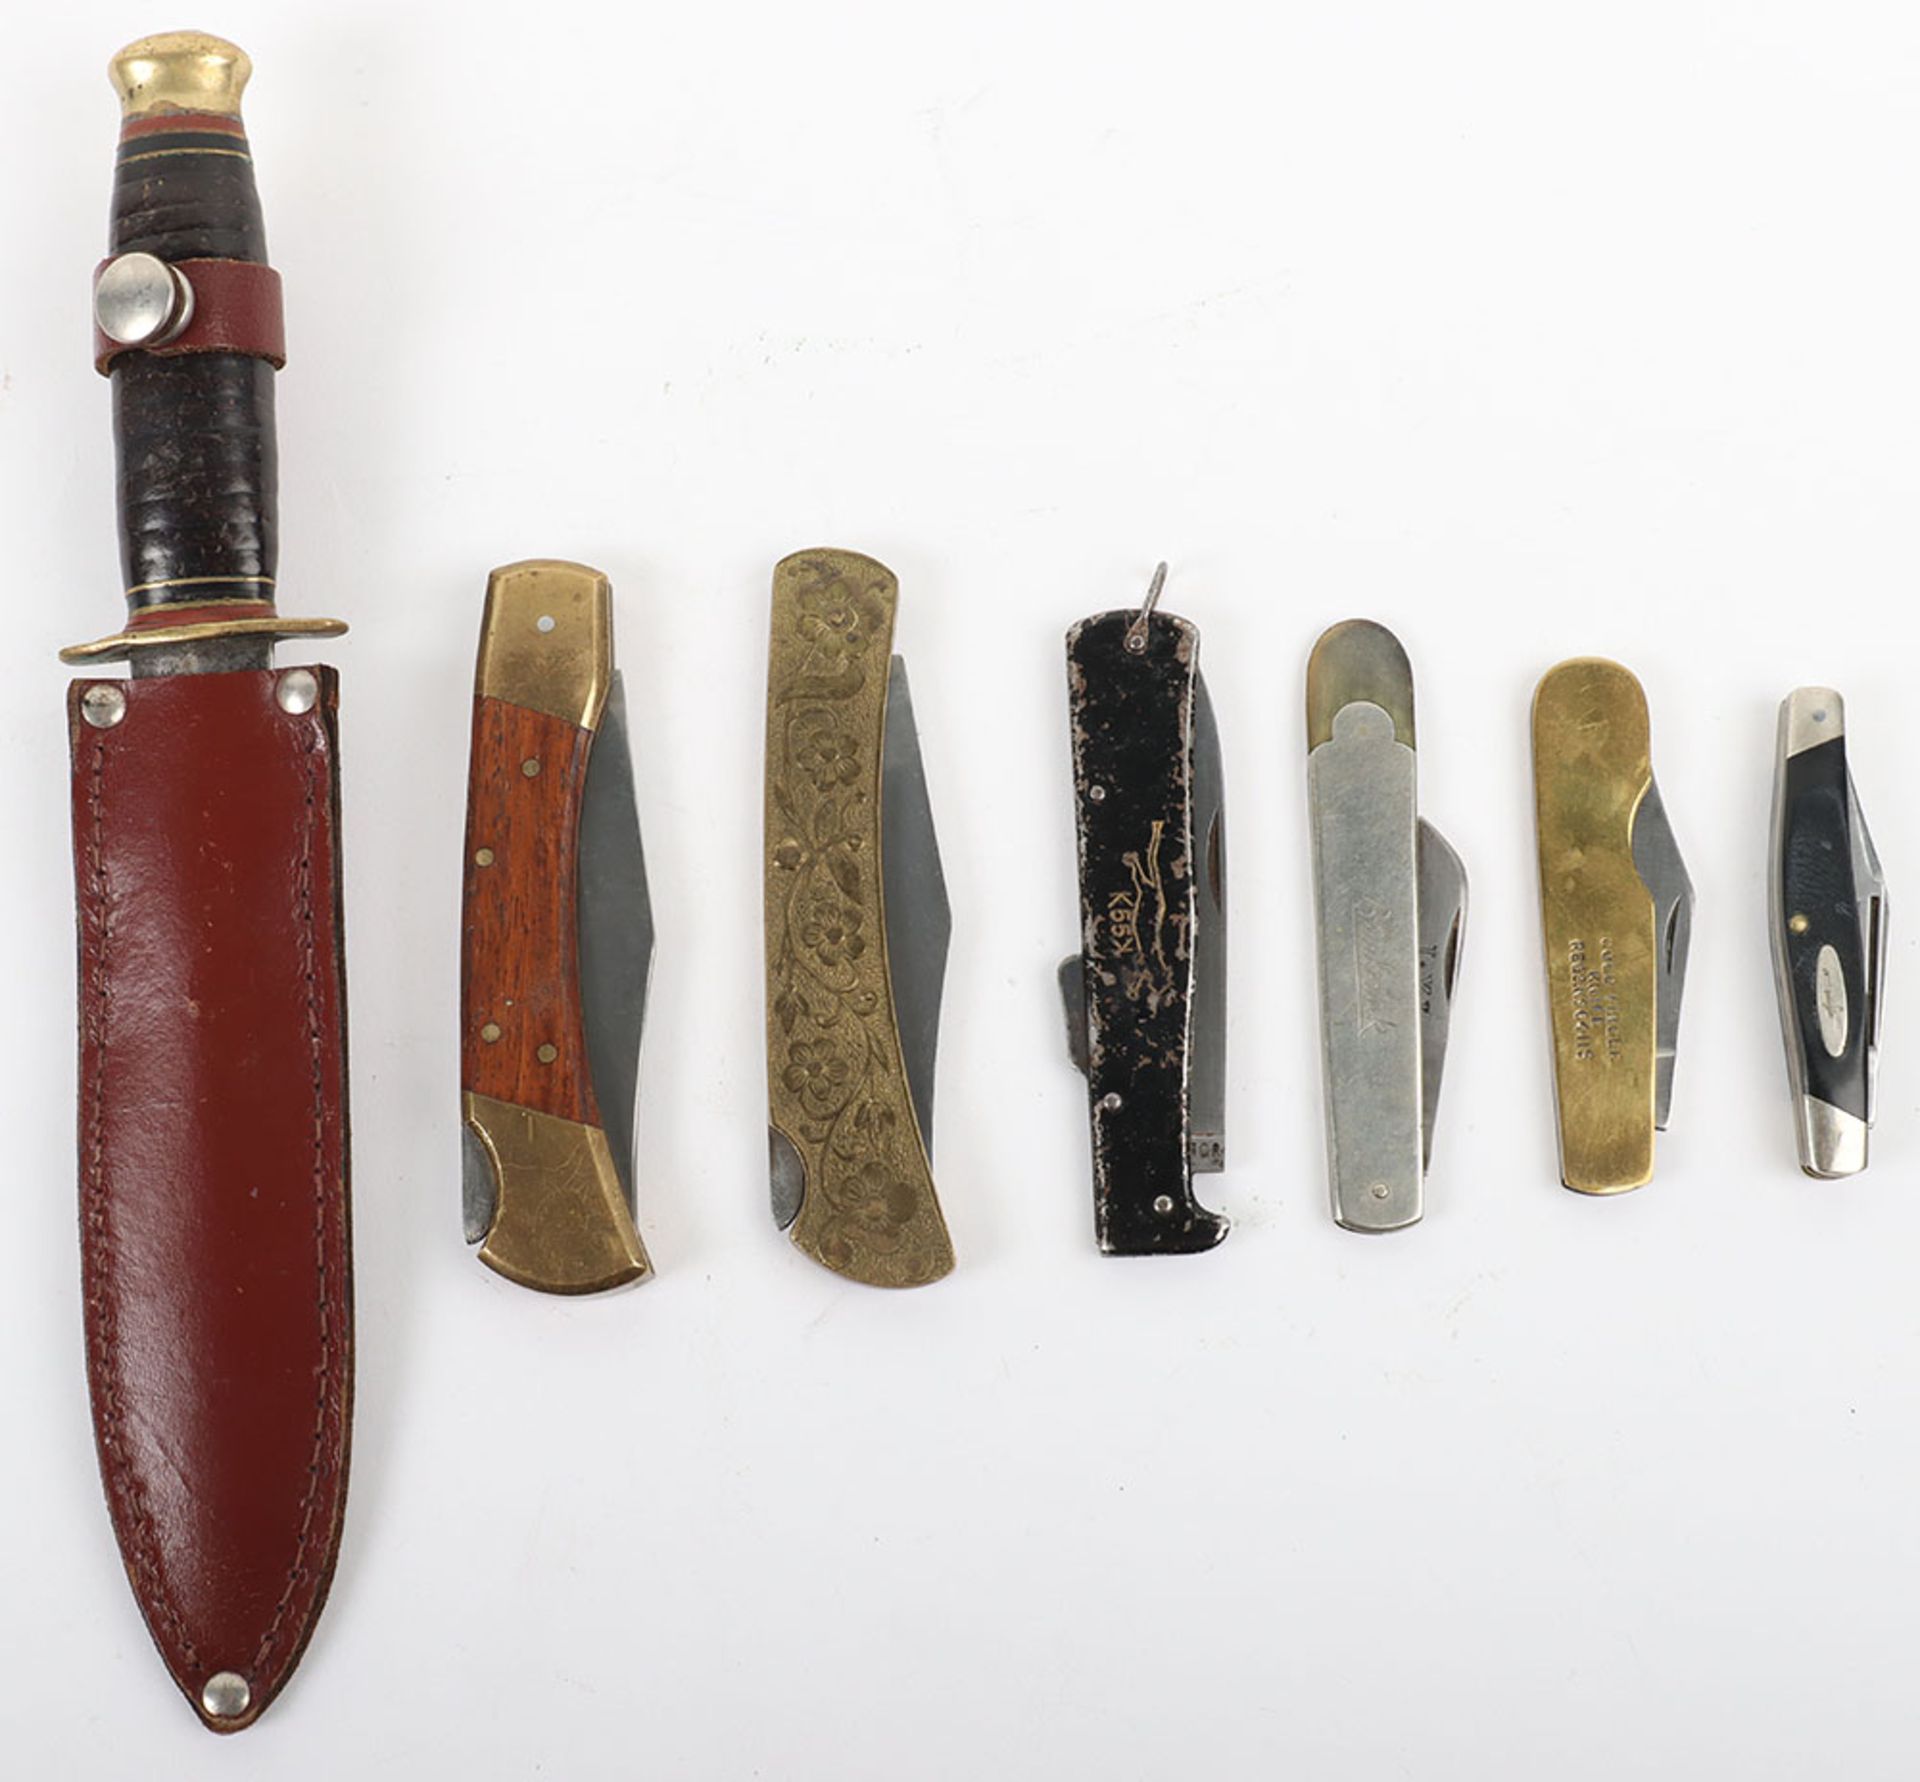 A selection of 20th century or earlier folding knives